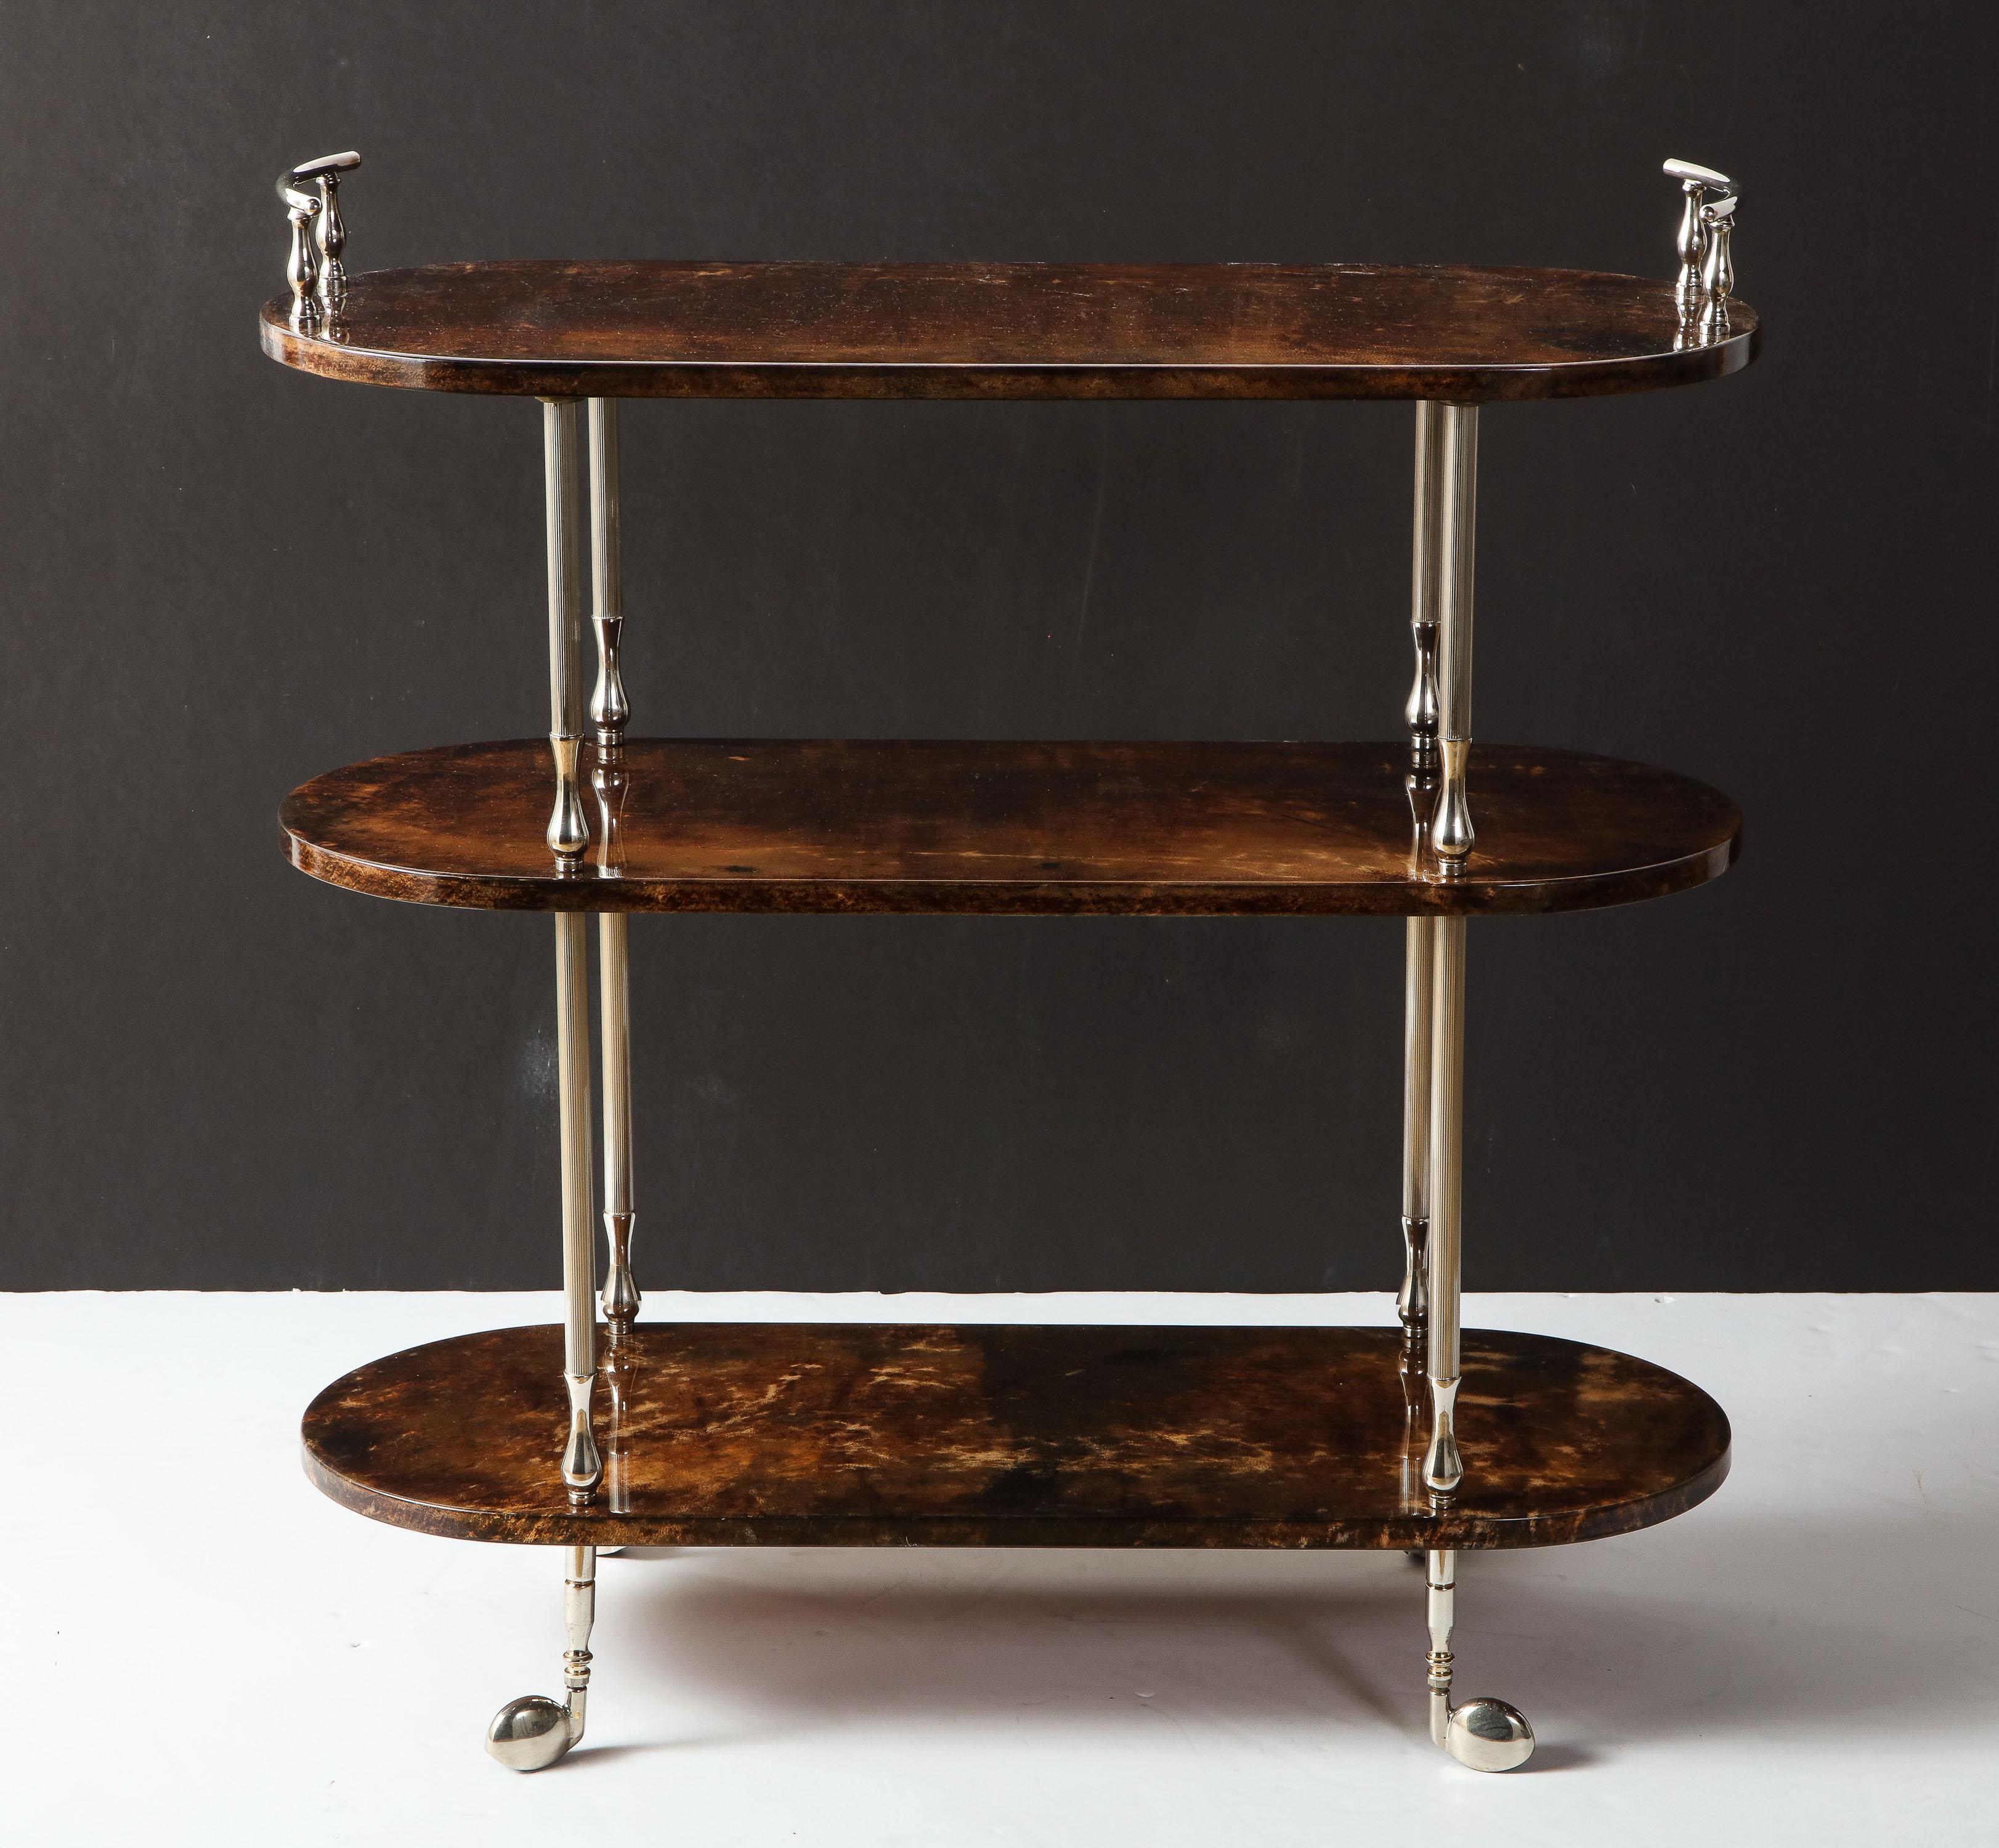 Decorative three shelves bar cart by Aldo Tura, Italy, circa 1950.
Dark chocolate goat skin parchment with polished chrome details.
Between top shelf and middle shelf is 12 inches. Between bottom shelf and middle shelf is 15.75 inches.
The bar